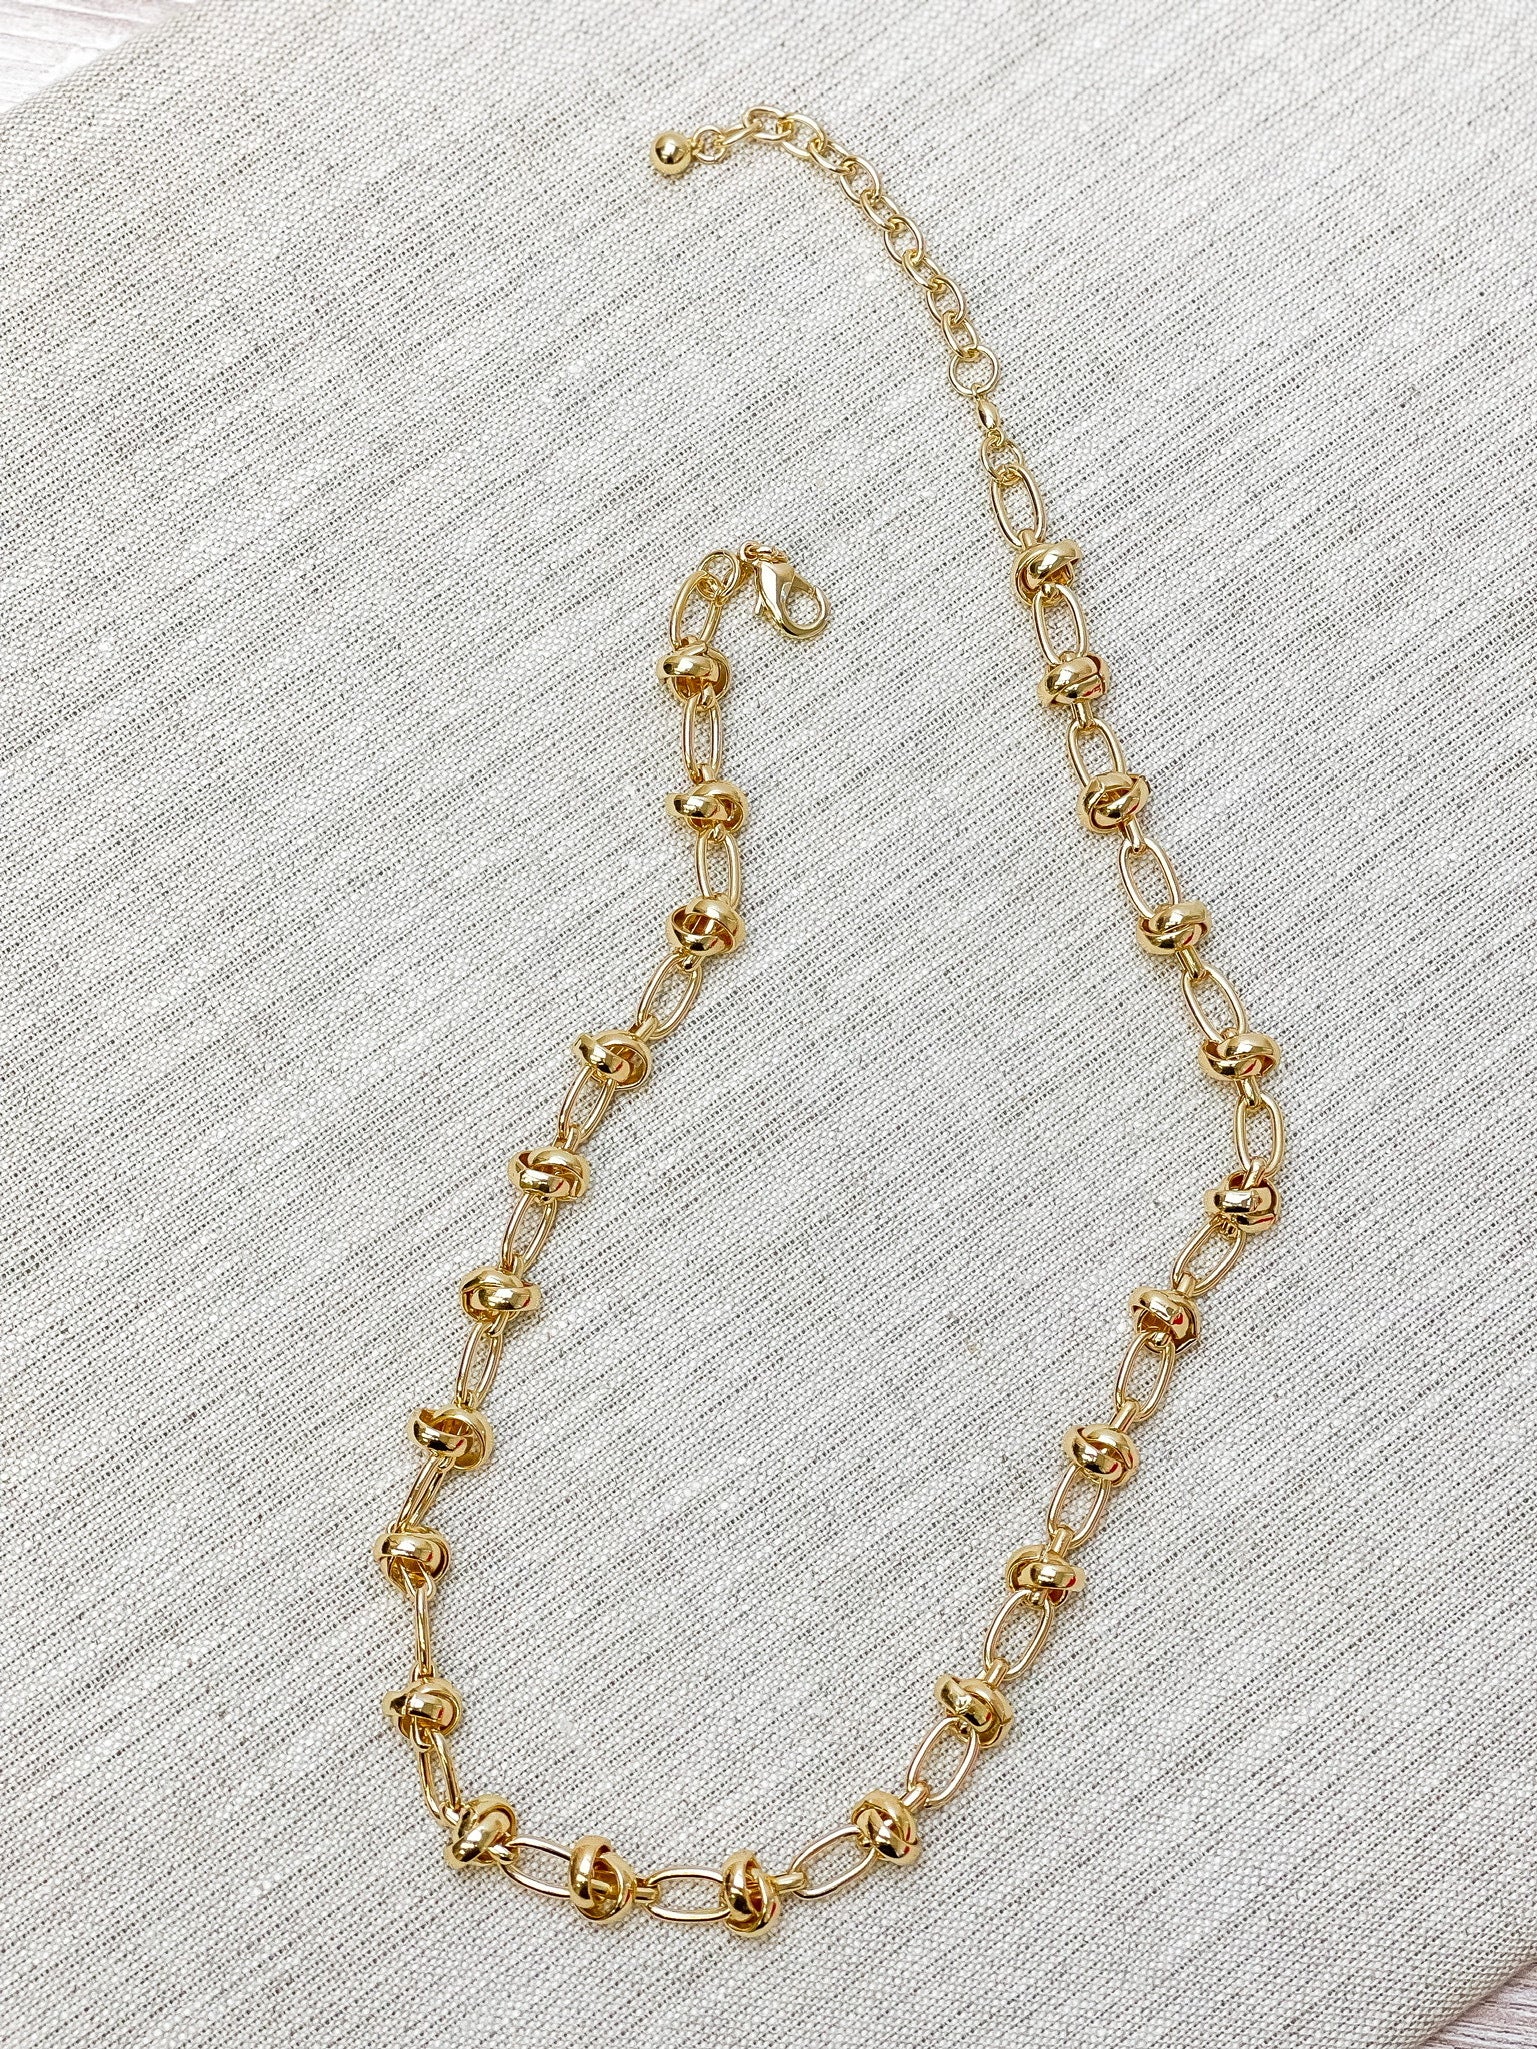 Mixed Link Chain Necklace - Gold